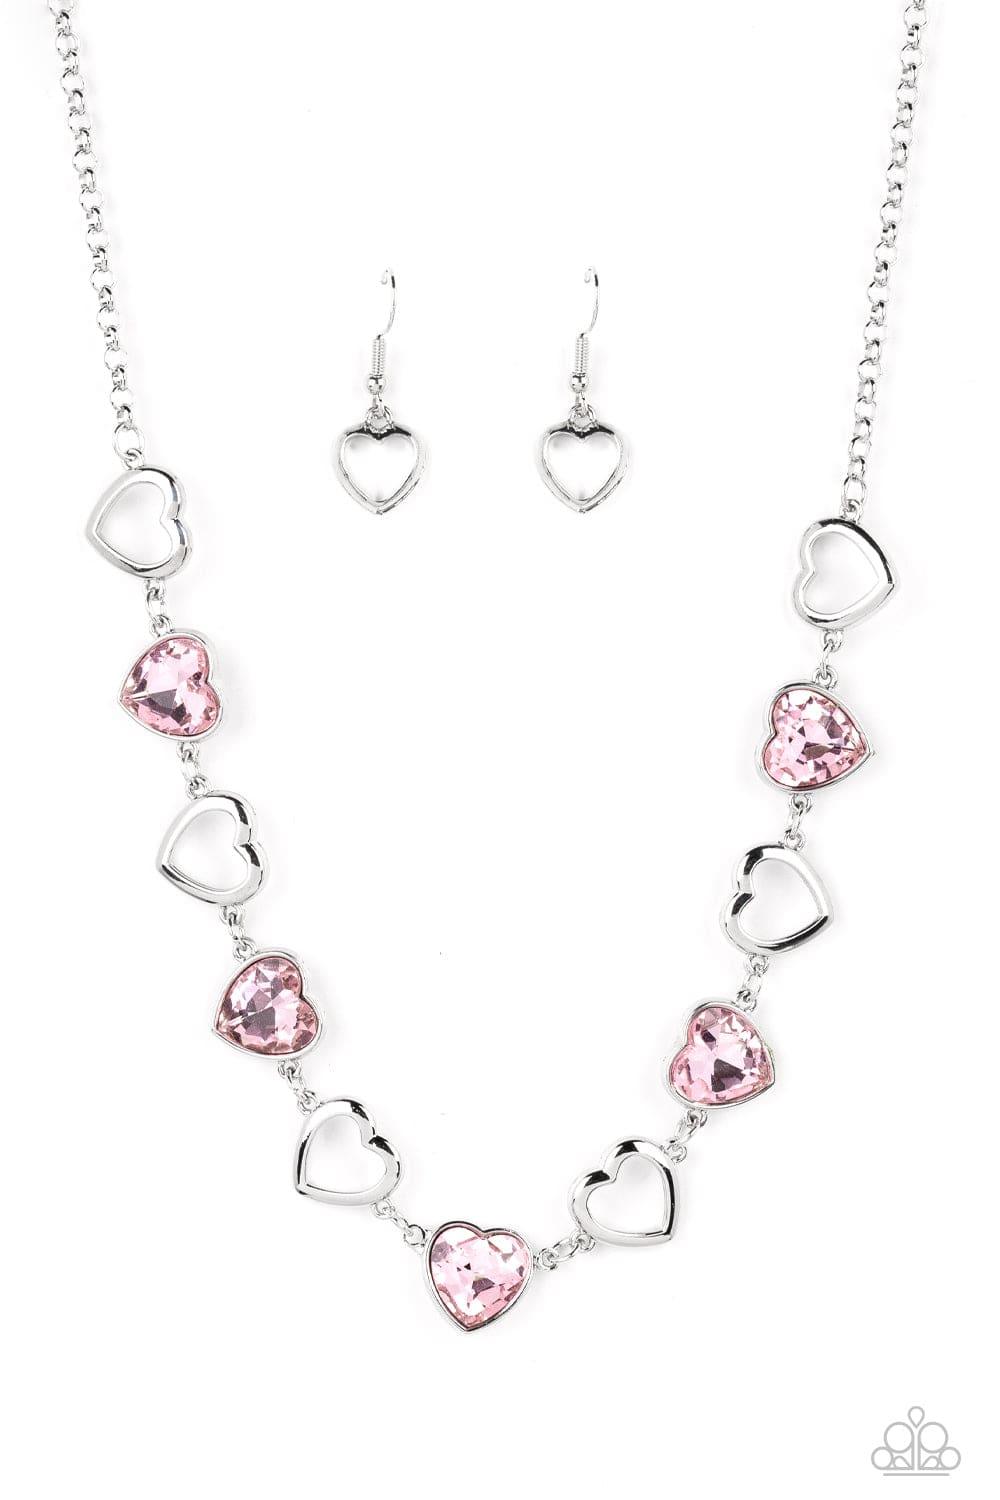 Paparazzi Accessories - Contemporary Cupid - Pink Necklace - Bling by JessieK